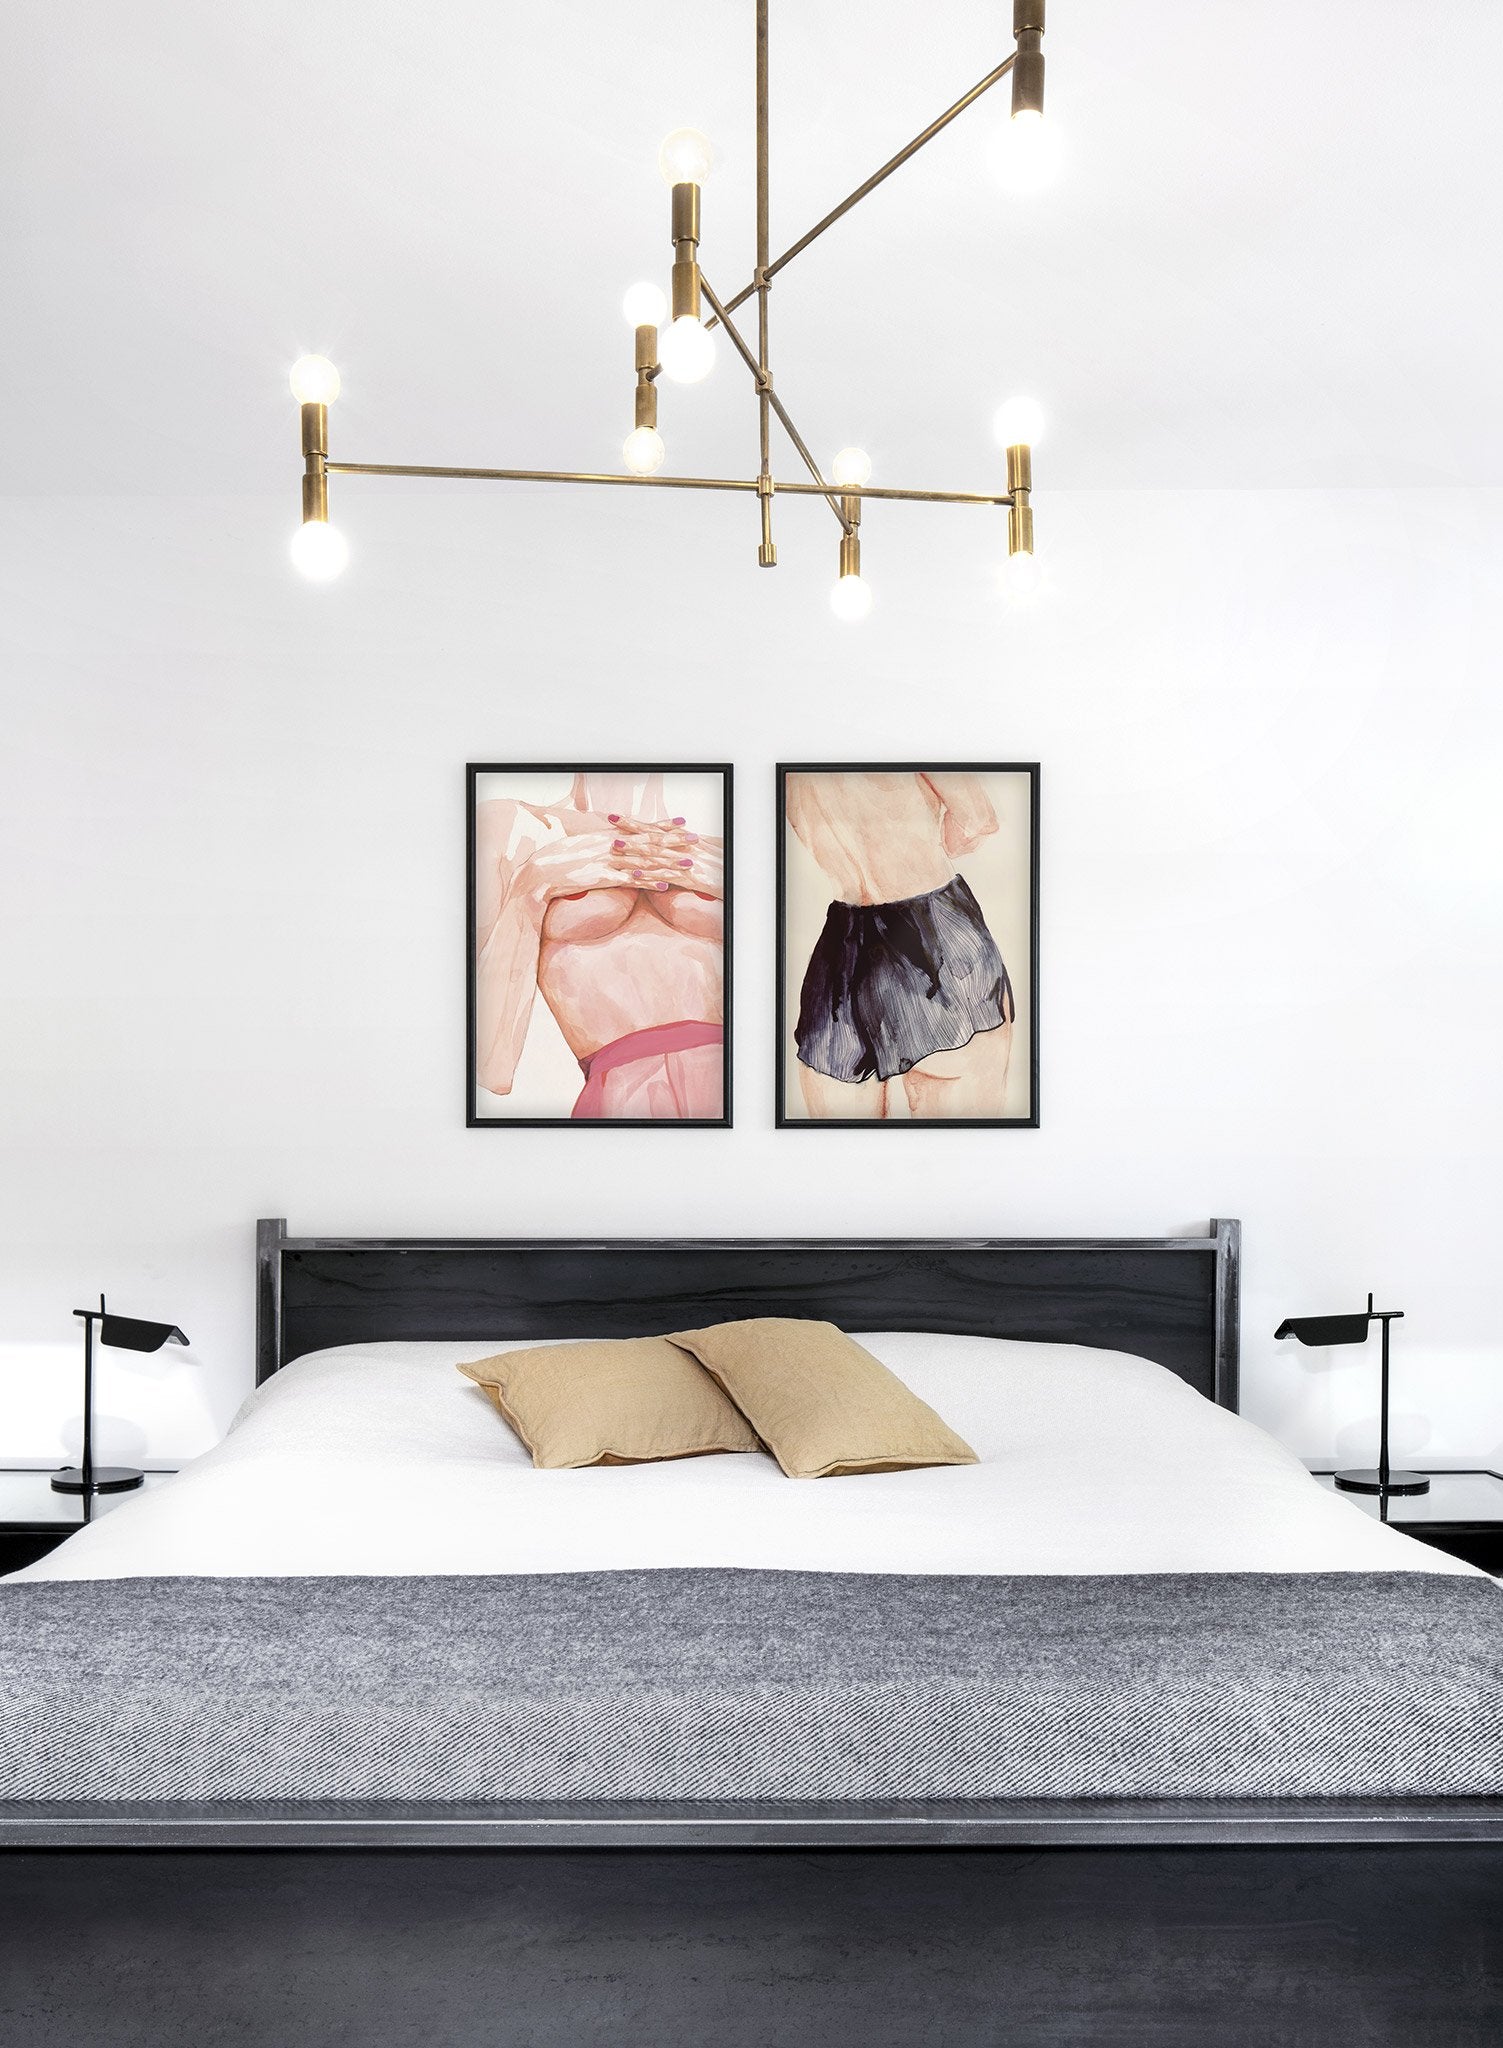 Fashion illustration poster by Opposite Wall with woman in shorts - Lifestyle Duo - Bedroom